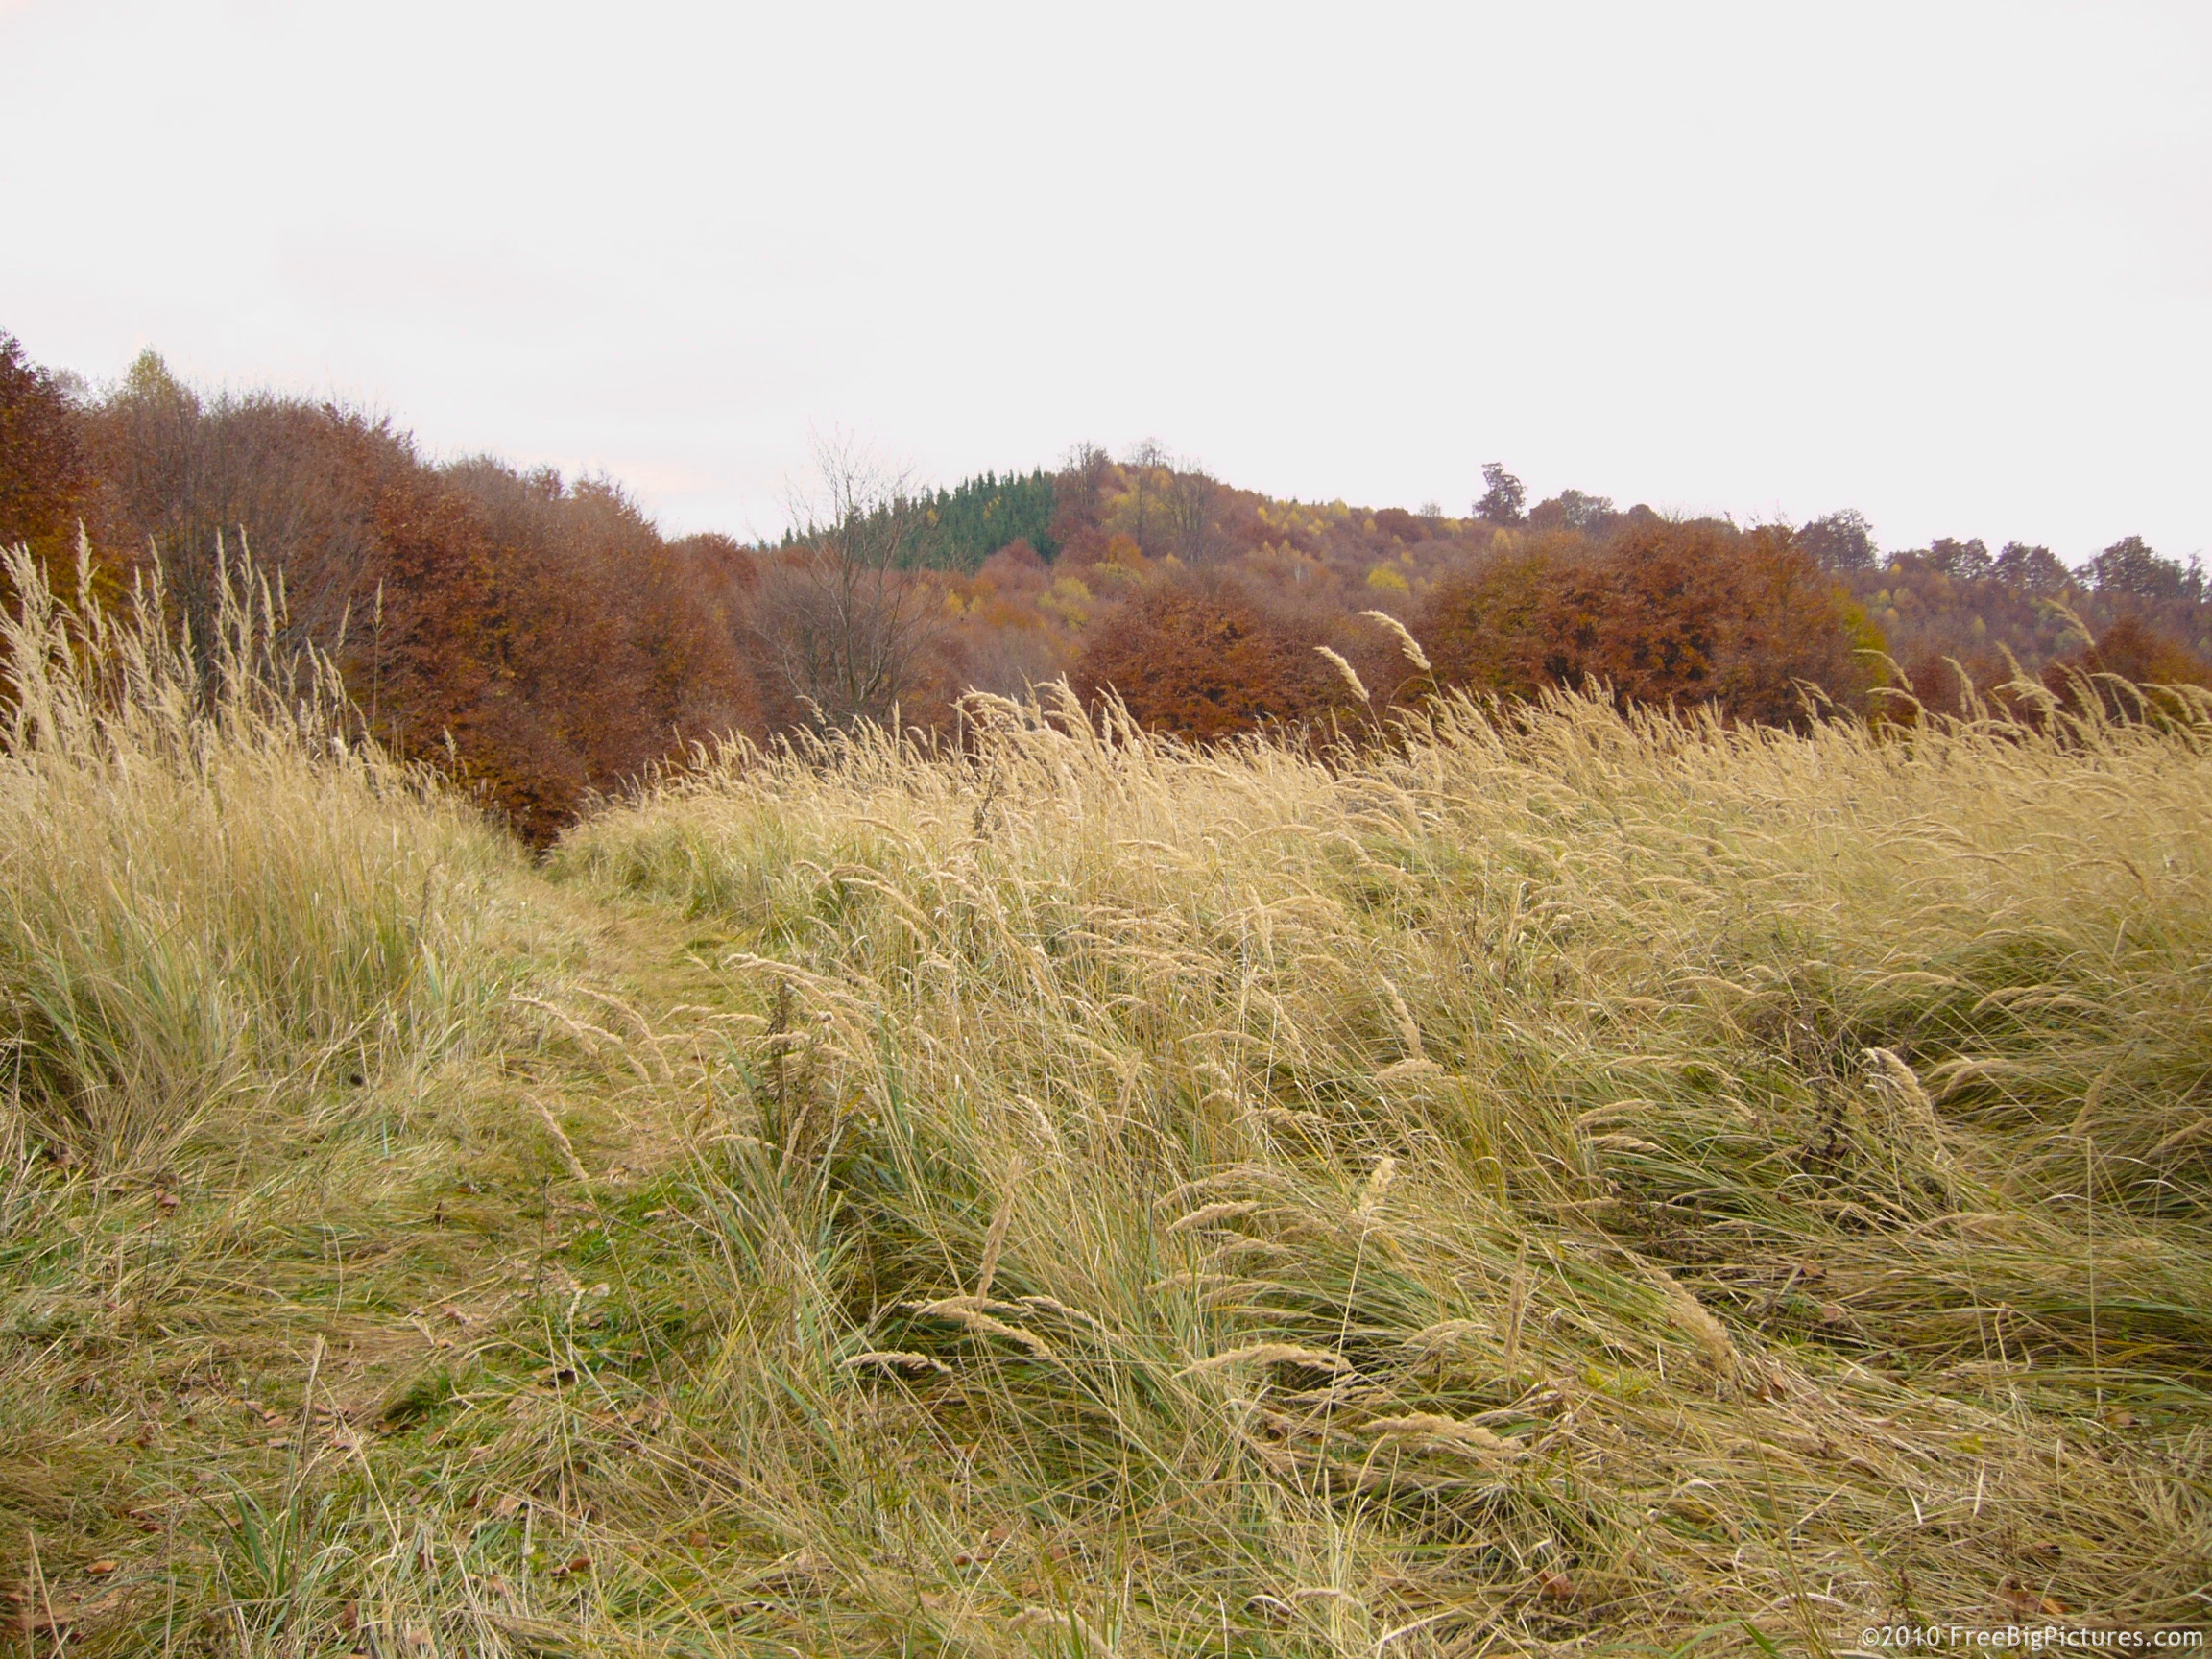 A long, hairy, dry grass in a meadow in the middle of the autumn. Is not a sunny image but the colors of the nature are warm, situated between a light yellow and rusty brown.